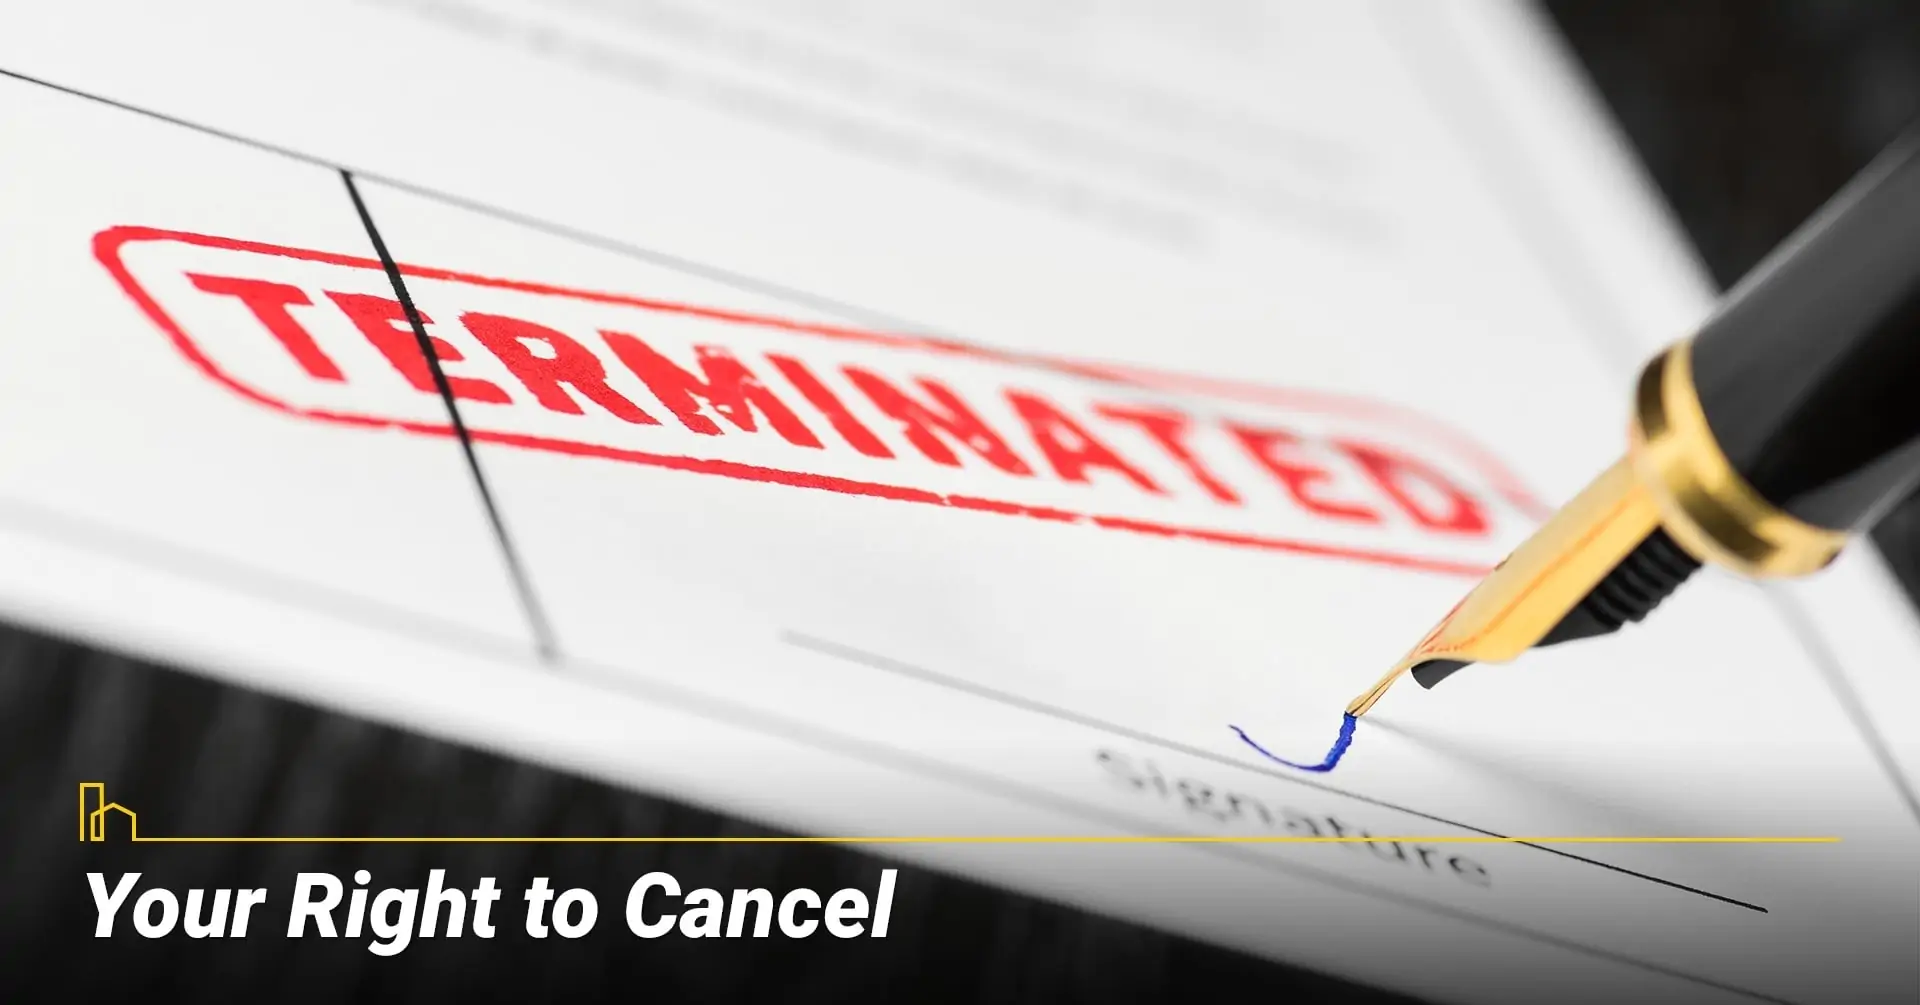 Do I Have the Right to Cancel? cancelling your reverse mortgage